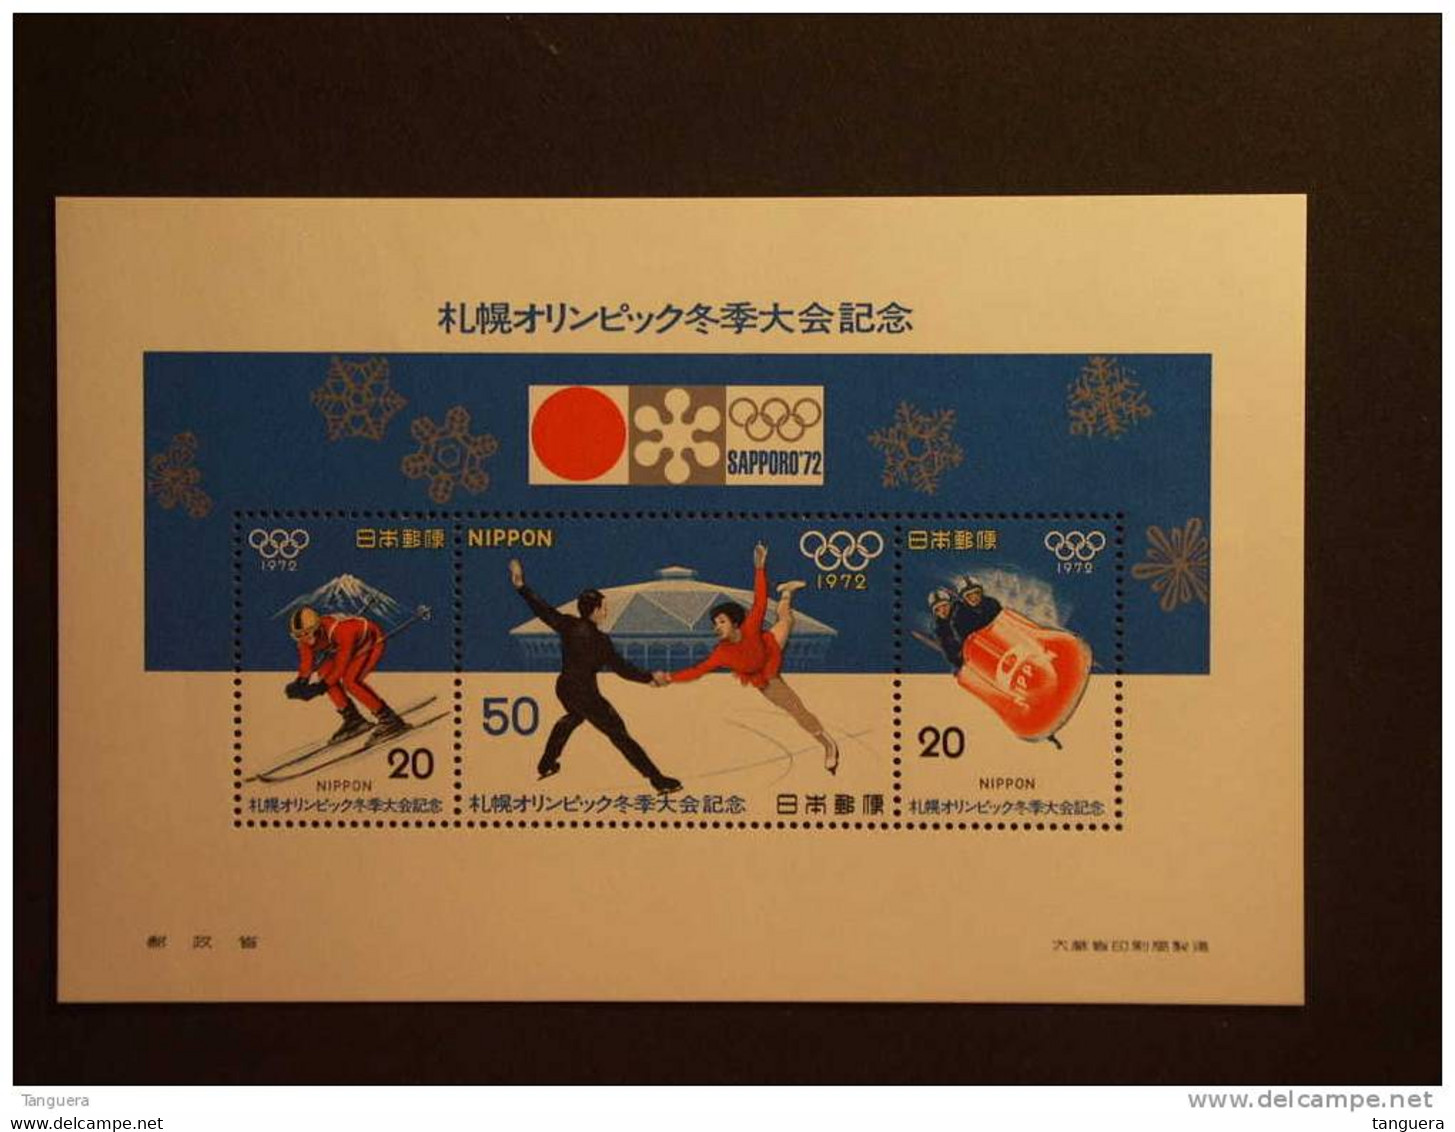 Japan Japon Nippon 1972 Jeux Olympique D'hiver Sapporo O.S Bobsleigh Descente Patinage Yv BF 70 MNH ** - Blocks & Sheetlets